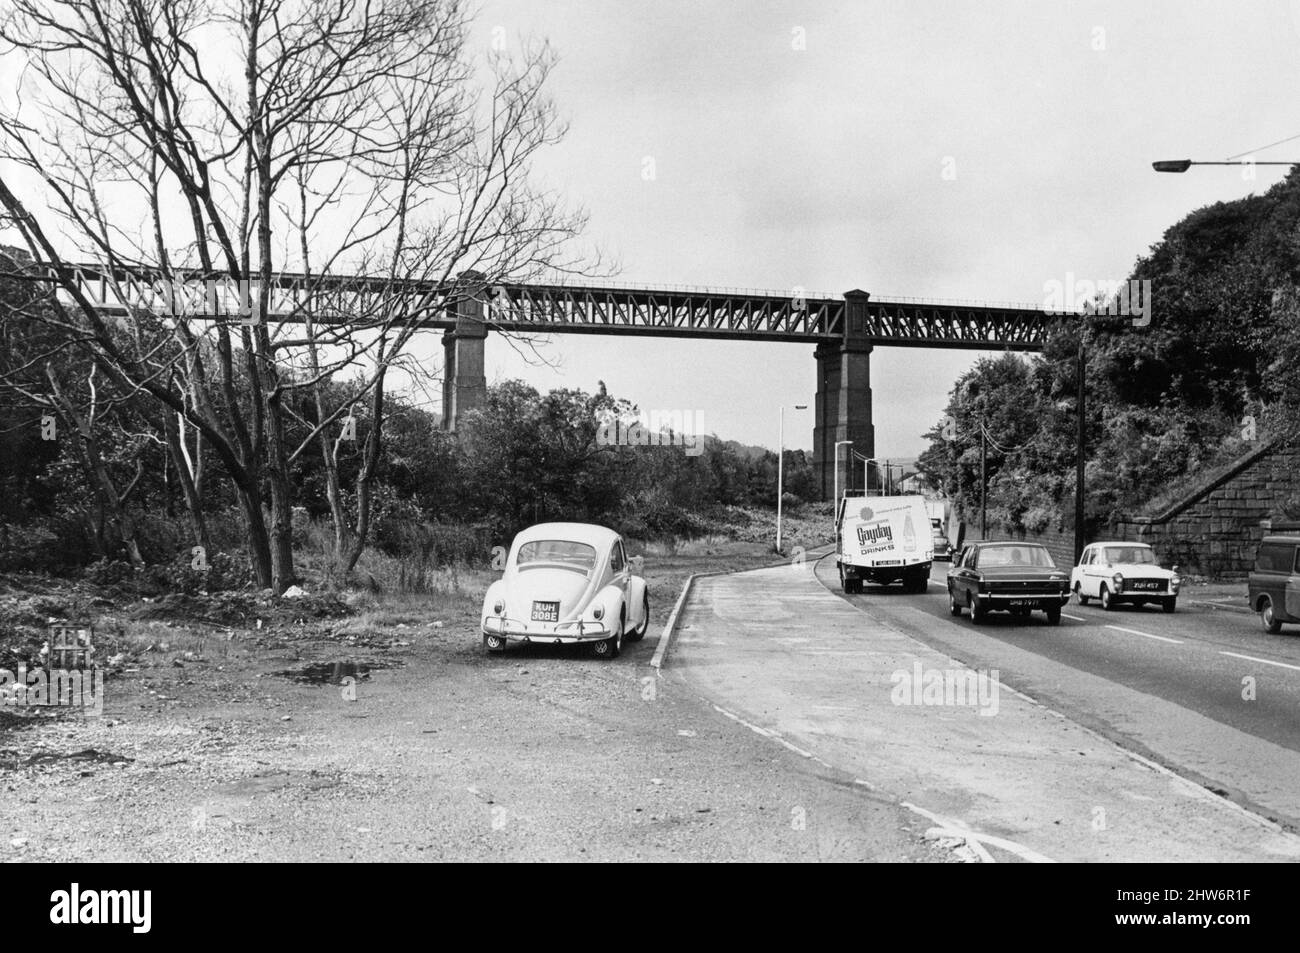 Walnut Tree Viaduct, a railway viaduct located above the southern edge of the village of Taffs Well, Cardiff, South Wales, Friday 20th September 1968. Made of Brick columns and Steel lattice girders spans.  Our Picture Shows ... Viaduct which crosses over the main Cardiff to Pontypridd Road. Stock Photo